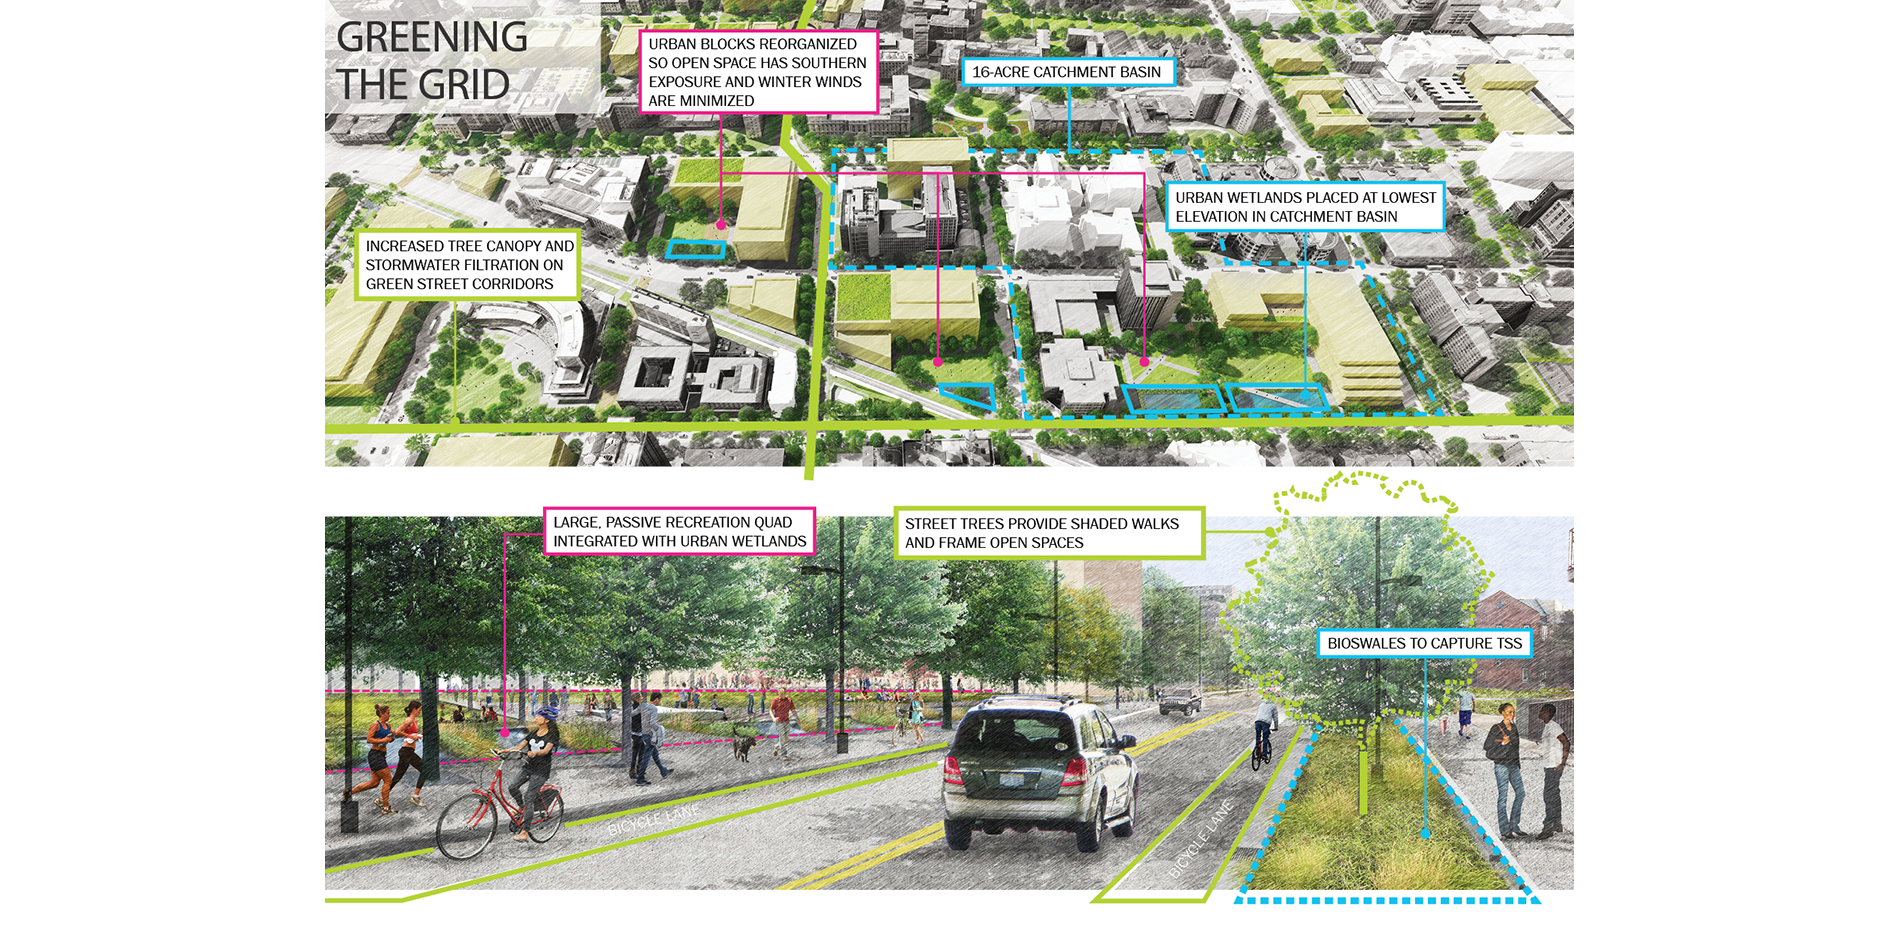 The new south campus grid reorients traditional quads and streets so they work as an integrated open space system that responds to microclimate, filte…